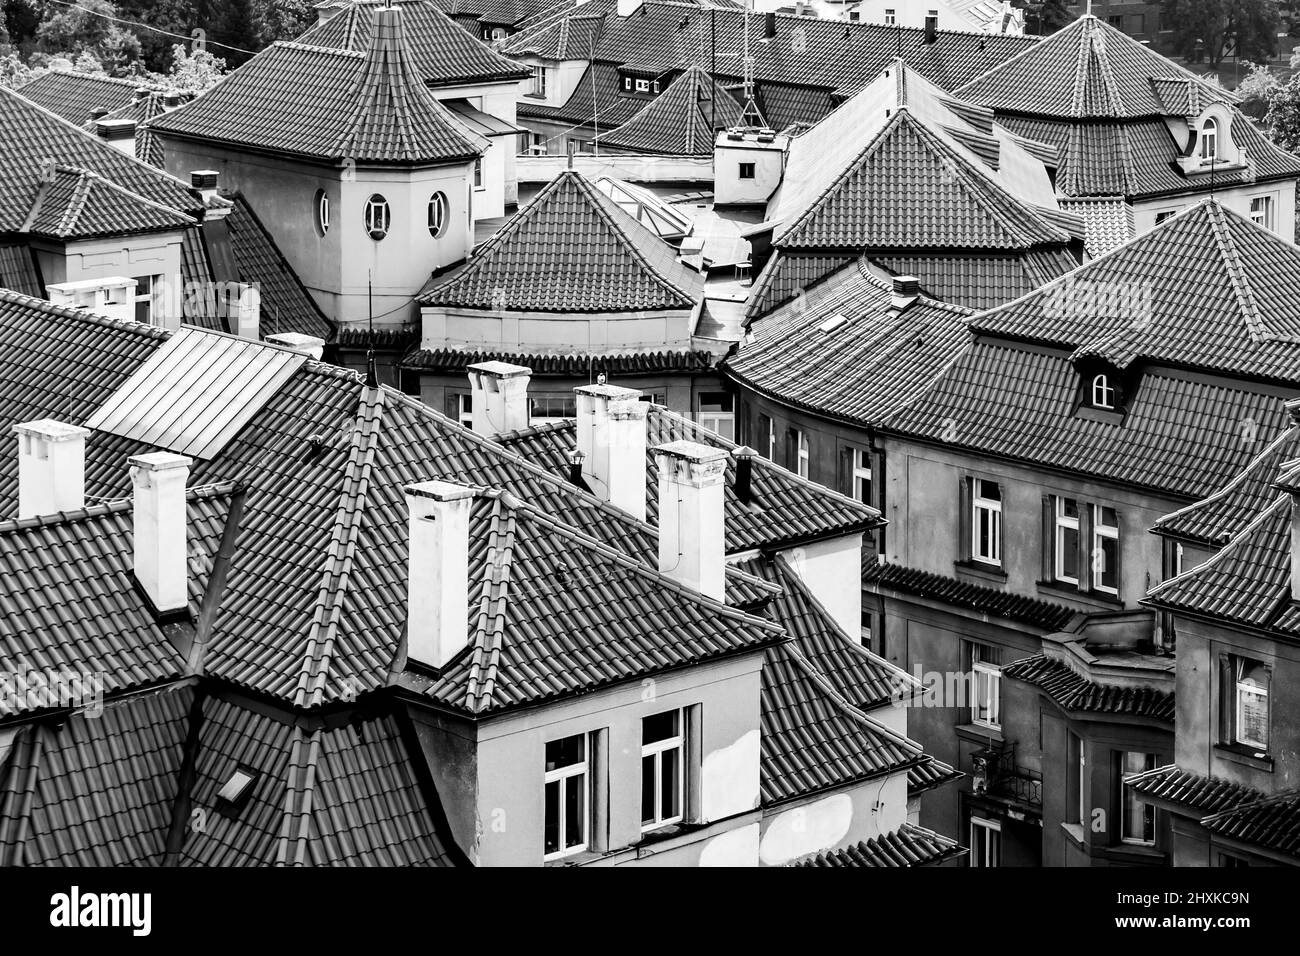 Vief of tiled roofs in Prague, Czech Republic. Black and white photography Stock Photo